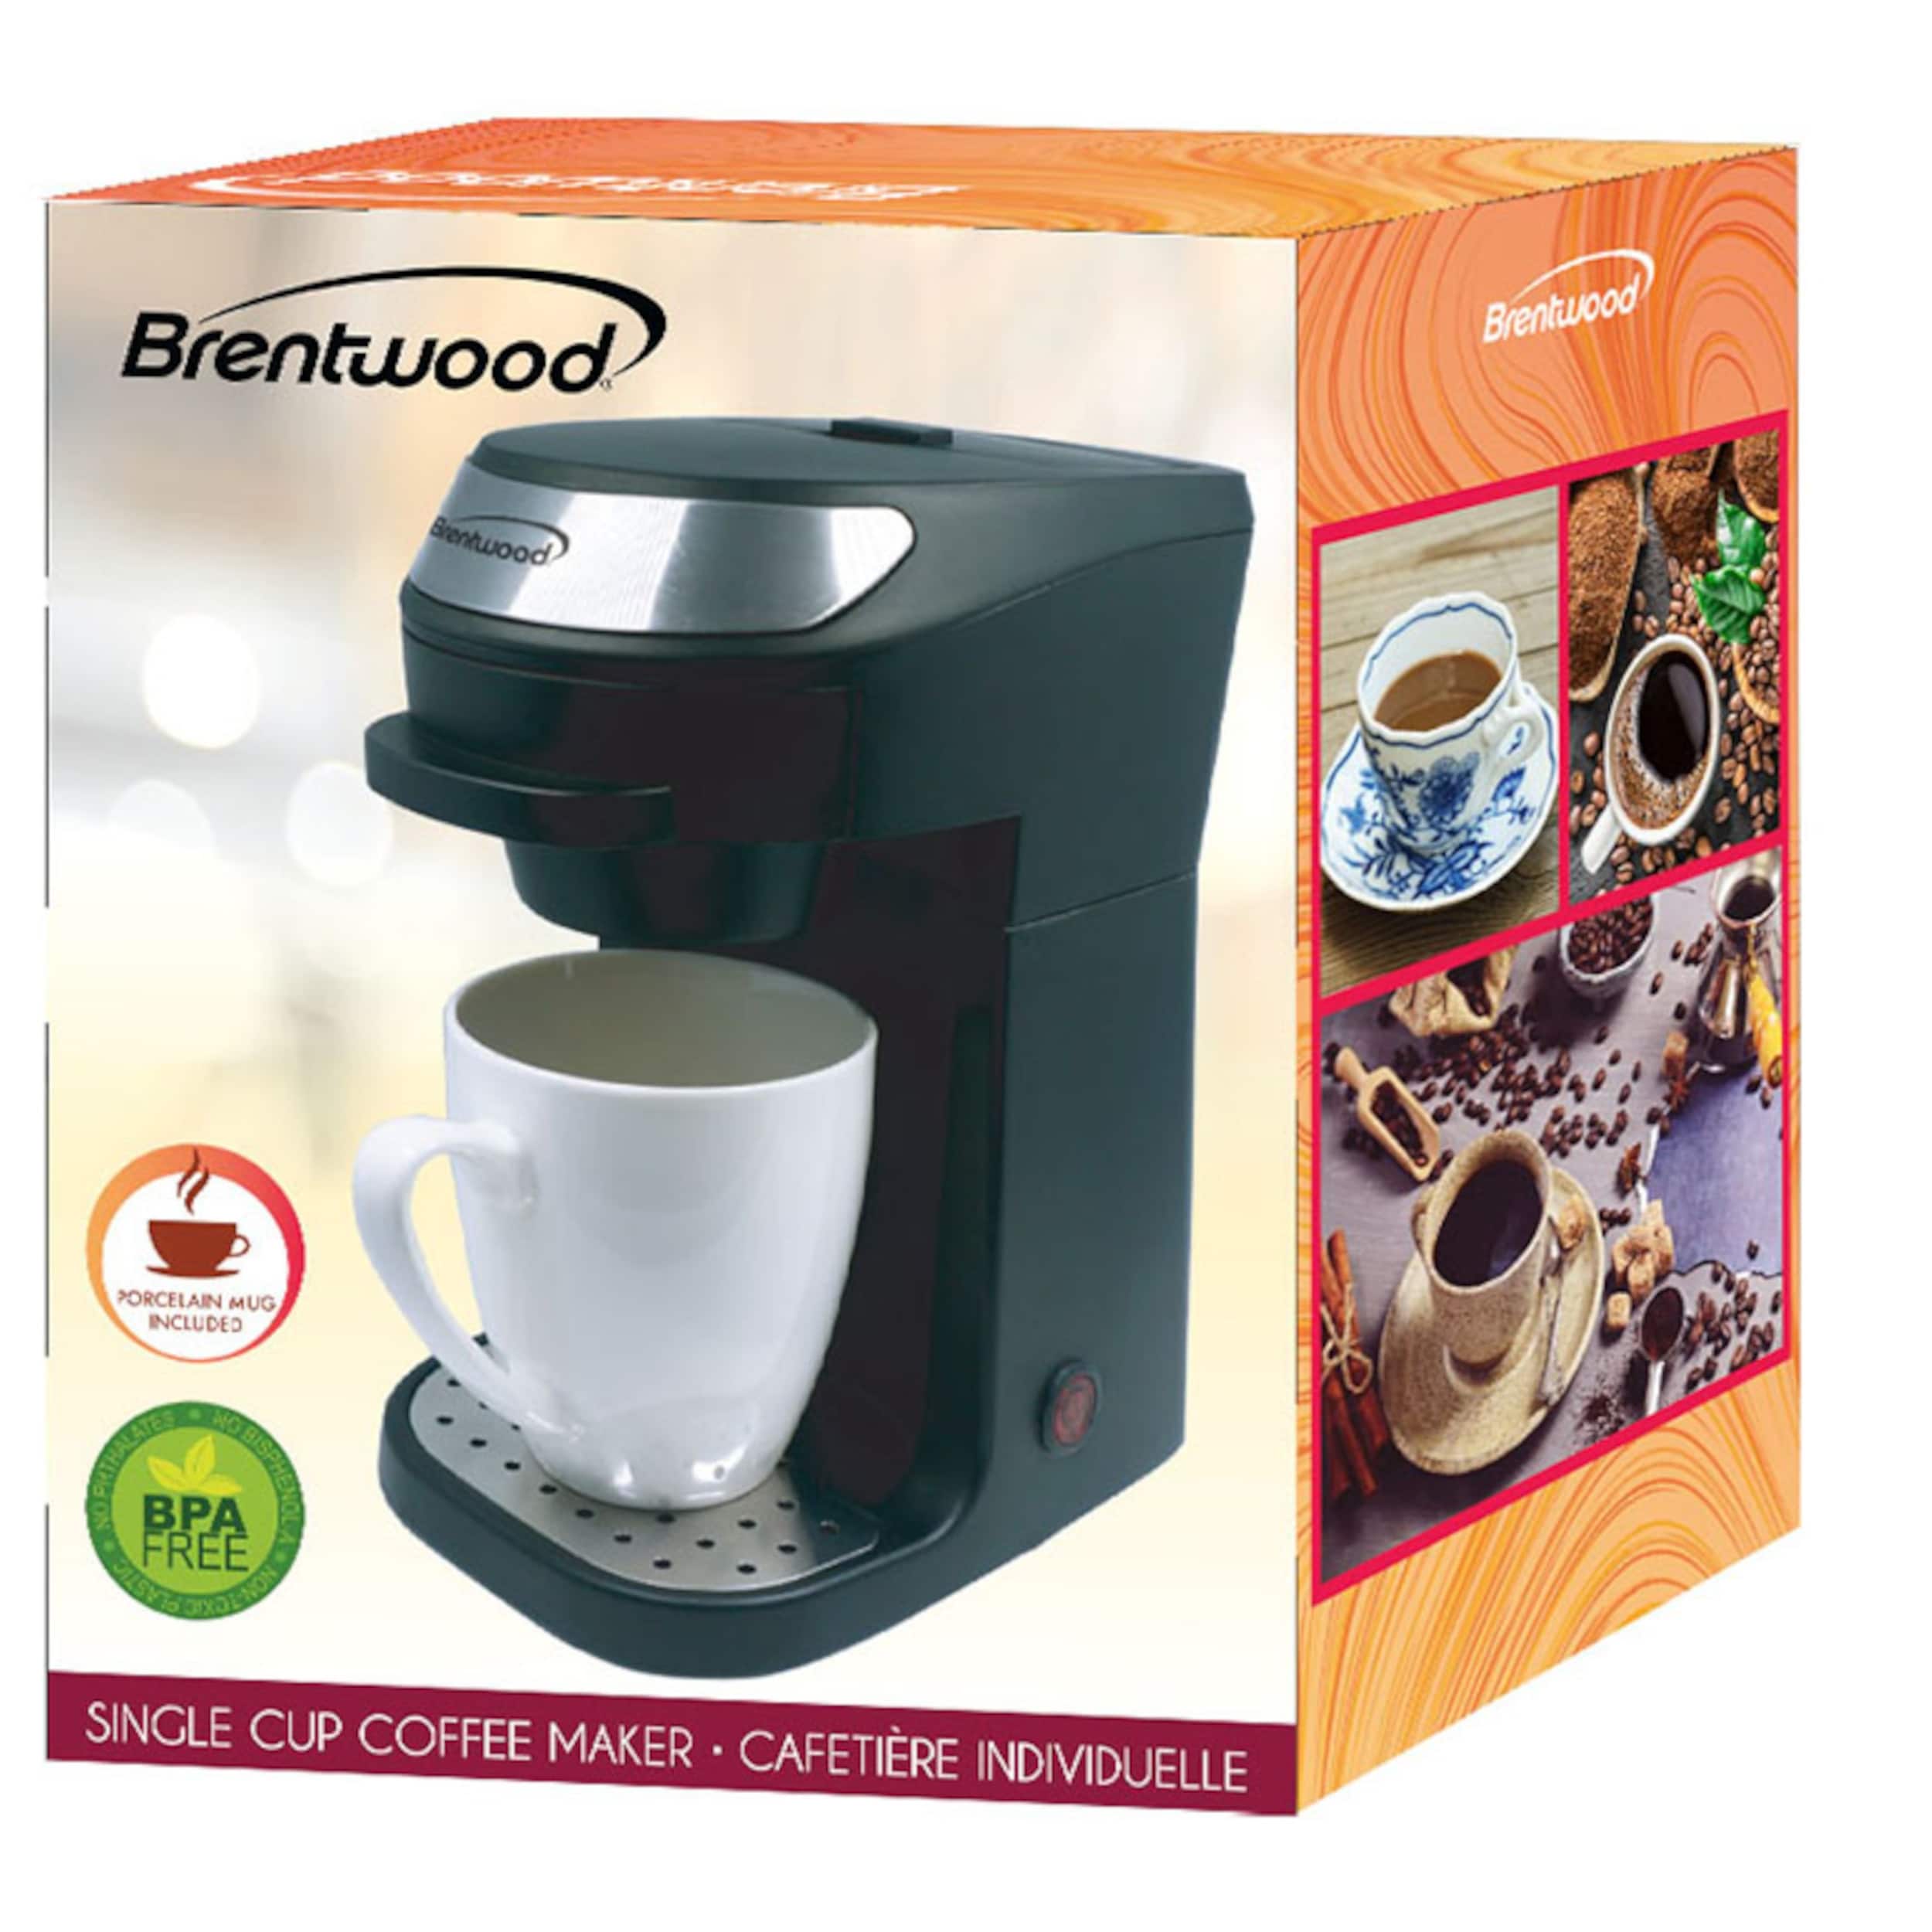 https://ak1.ostkcdn.com/images/products/is/images/direct/3448a4e81abde17cd30fd6c25ac52bbd2344138a/Brentwood-TS-111BK-Single-Serve-Coffee-Maker-with-Mug%2C-Black.jpg